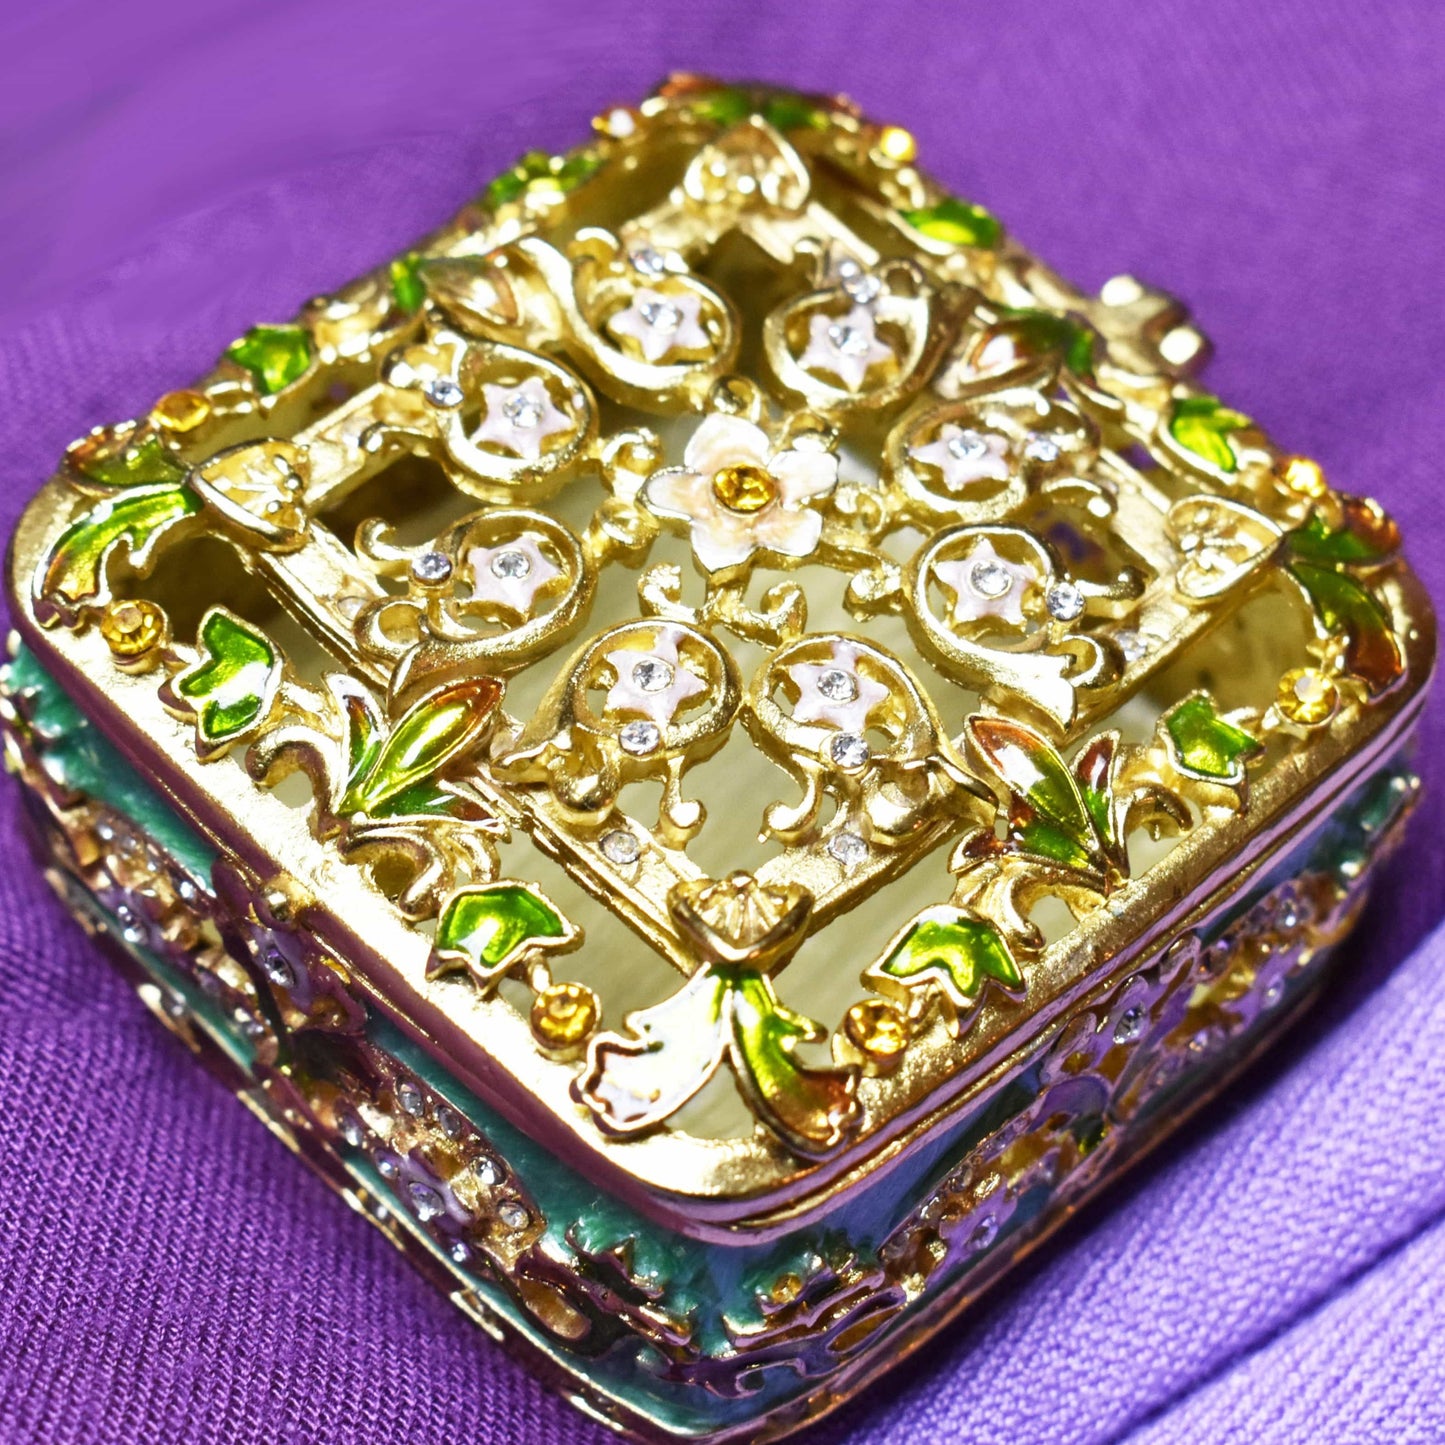 Vintage Gold Tone Metal Jewelry Box Hinged 2 Tier Footed Rhinestone Accents